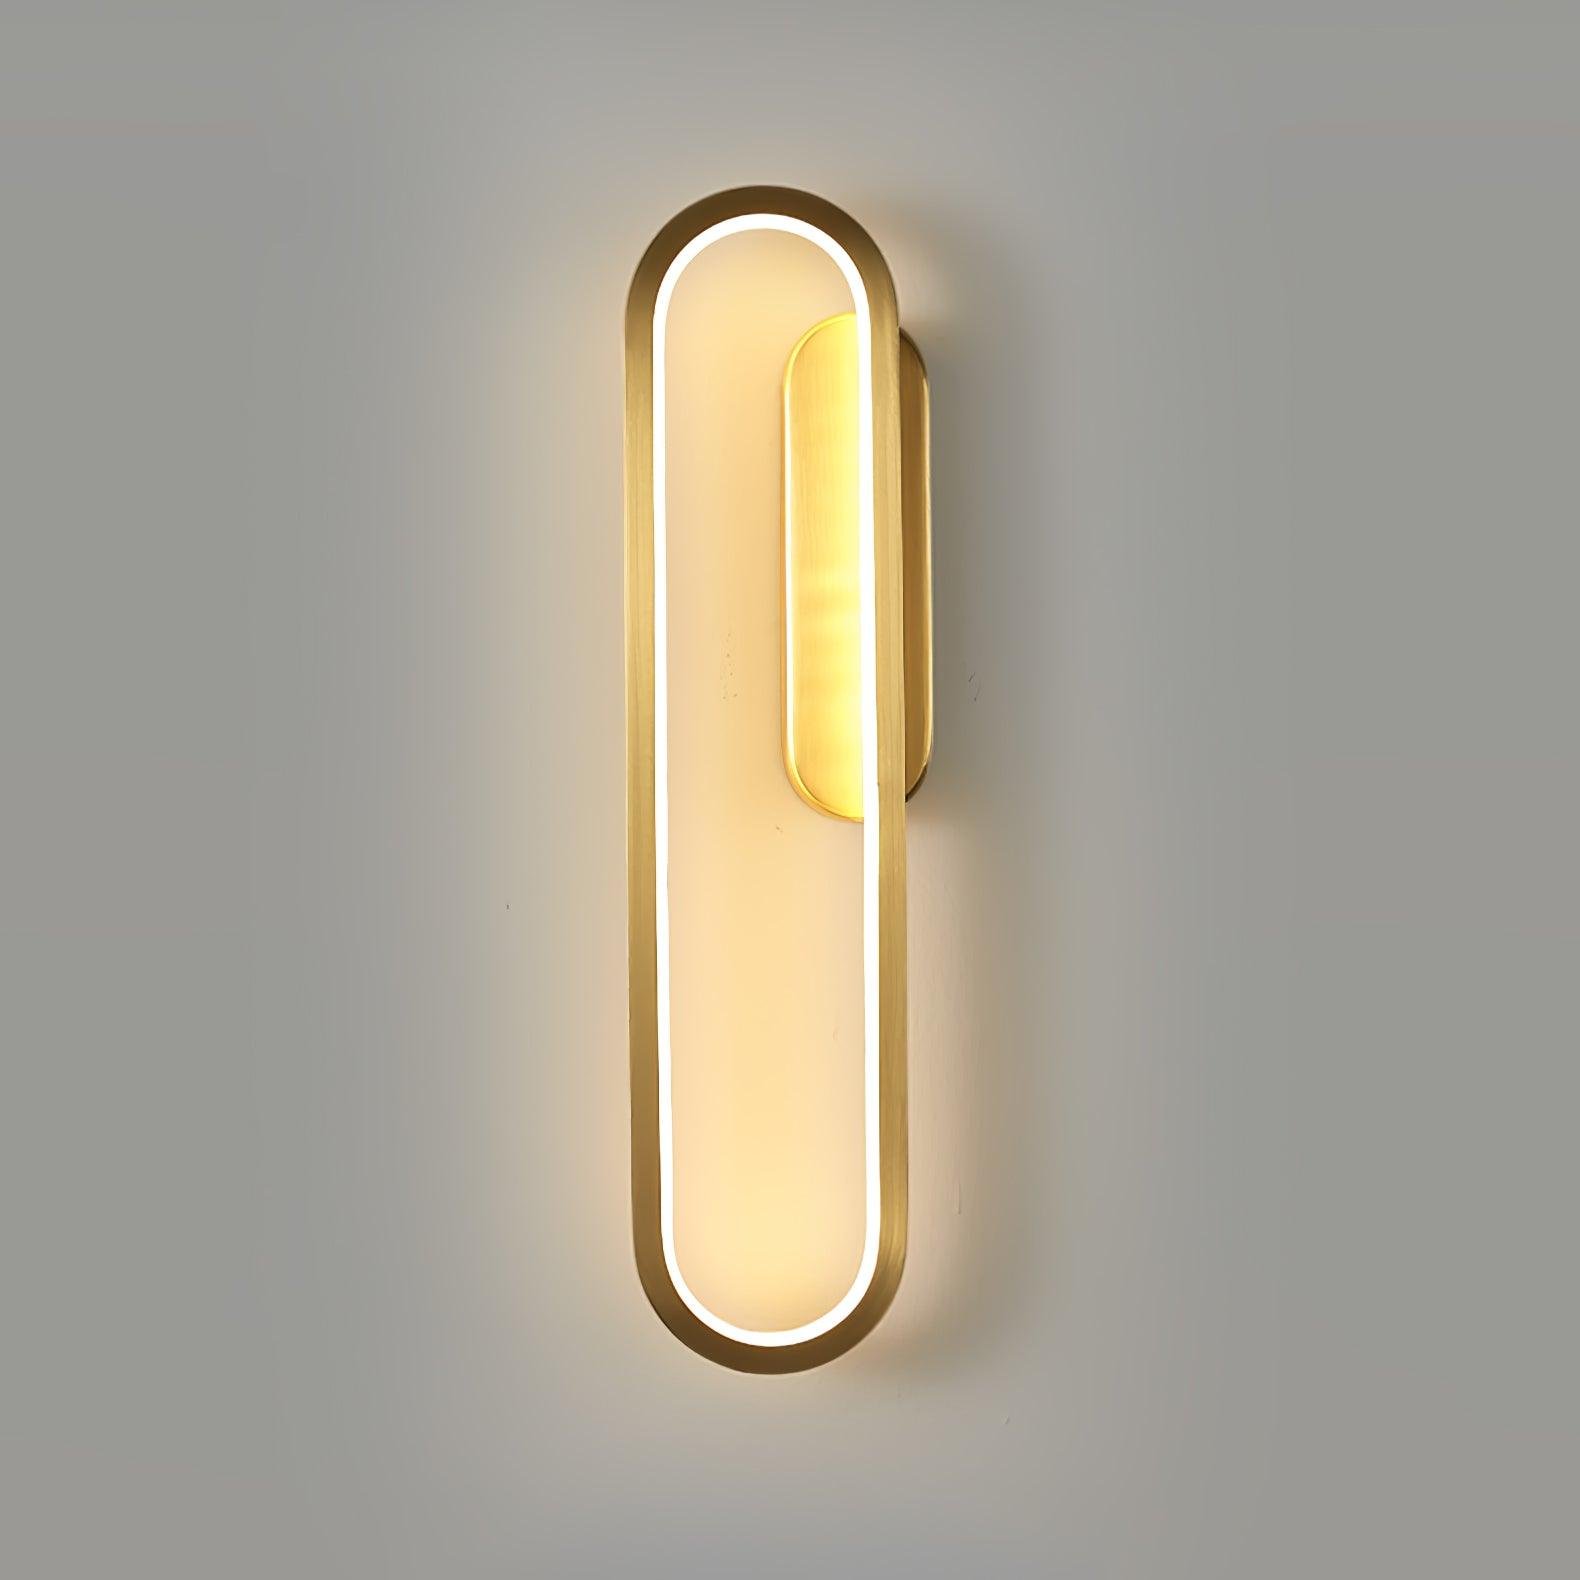 Long Ova Wall Lamp - Right Orientation: Diameter 3.9 inches x Height 15.7 inches or Diameter 10cm x Height 40cm, made of Brass with a Cool Light